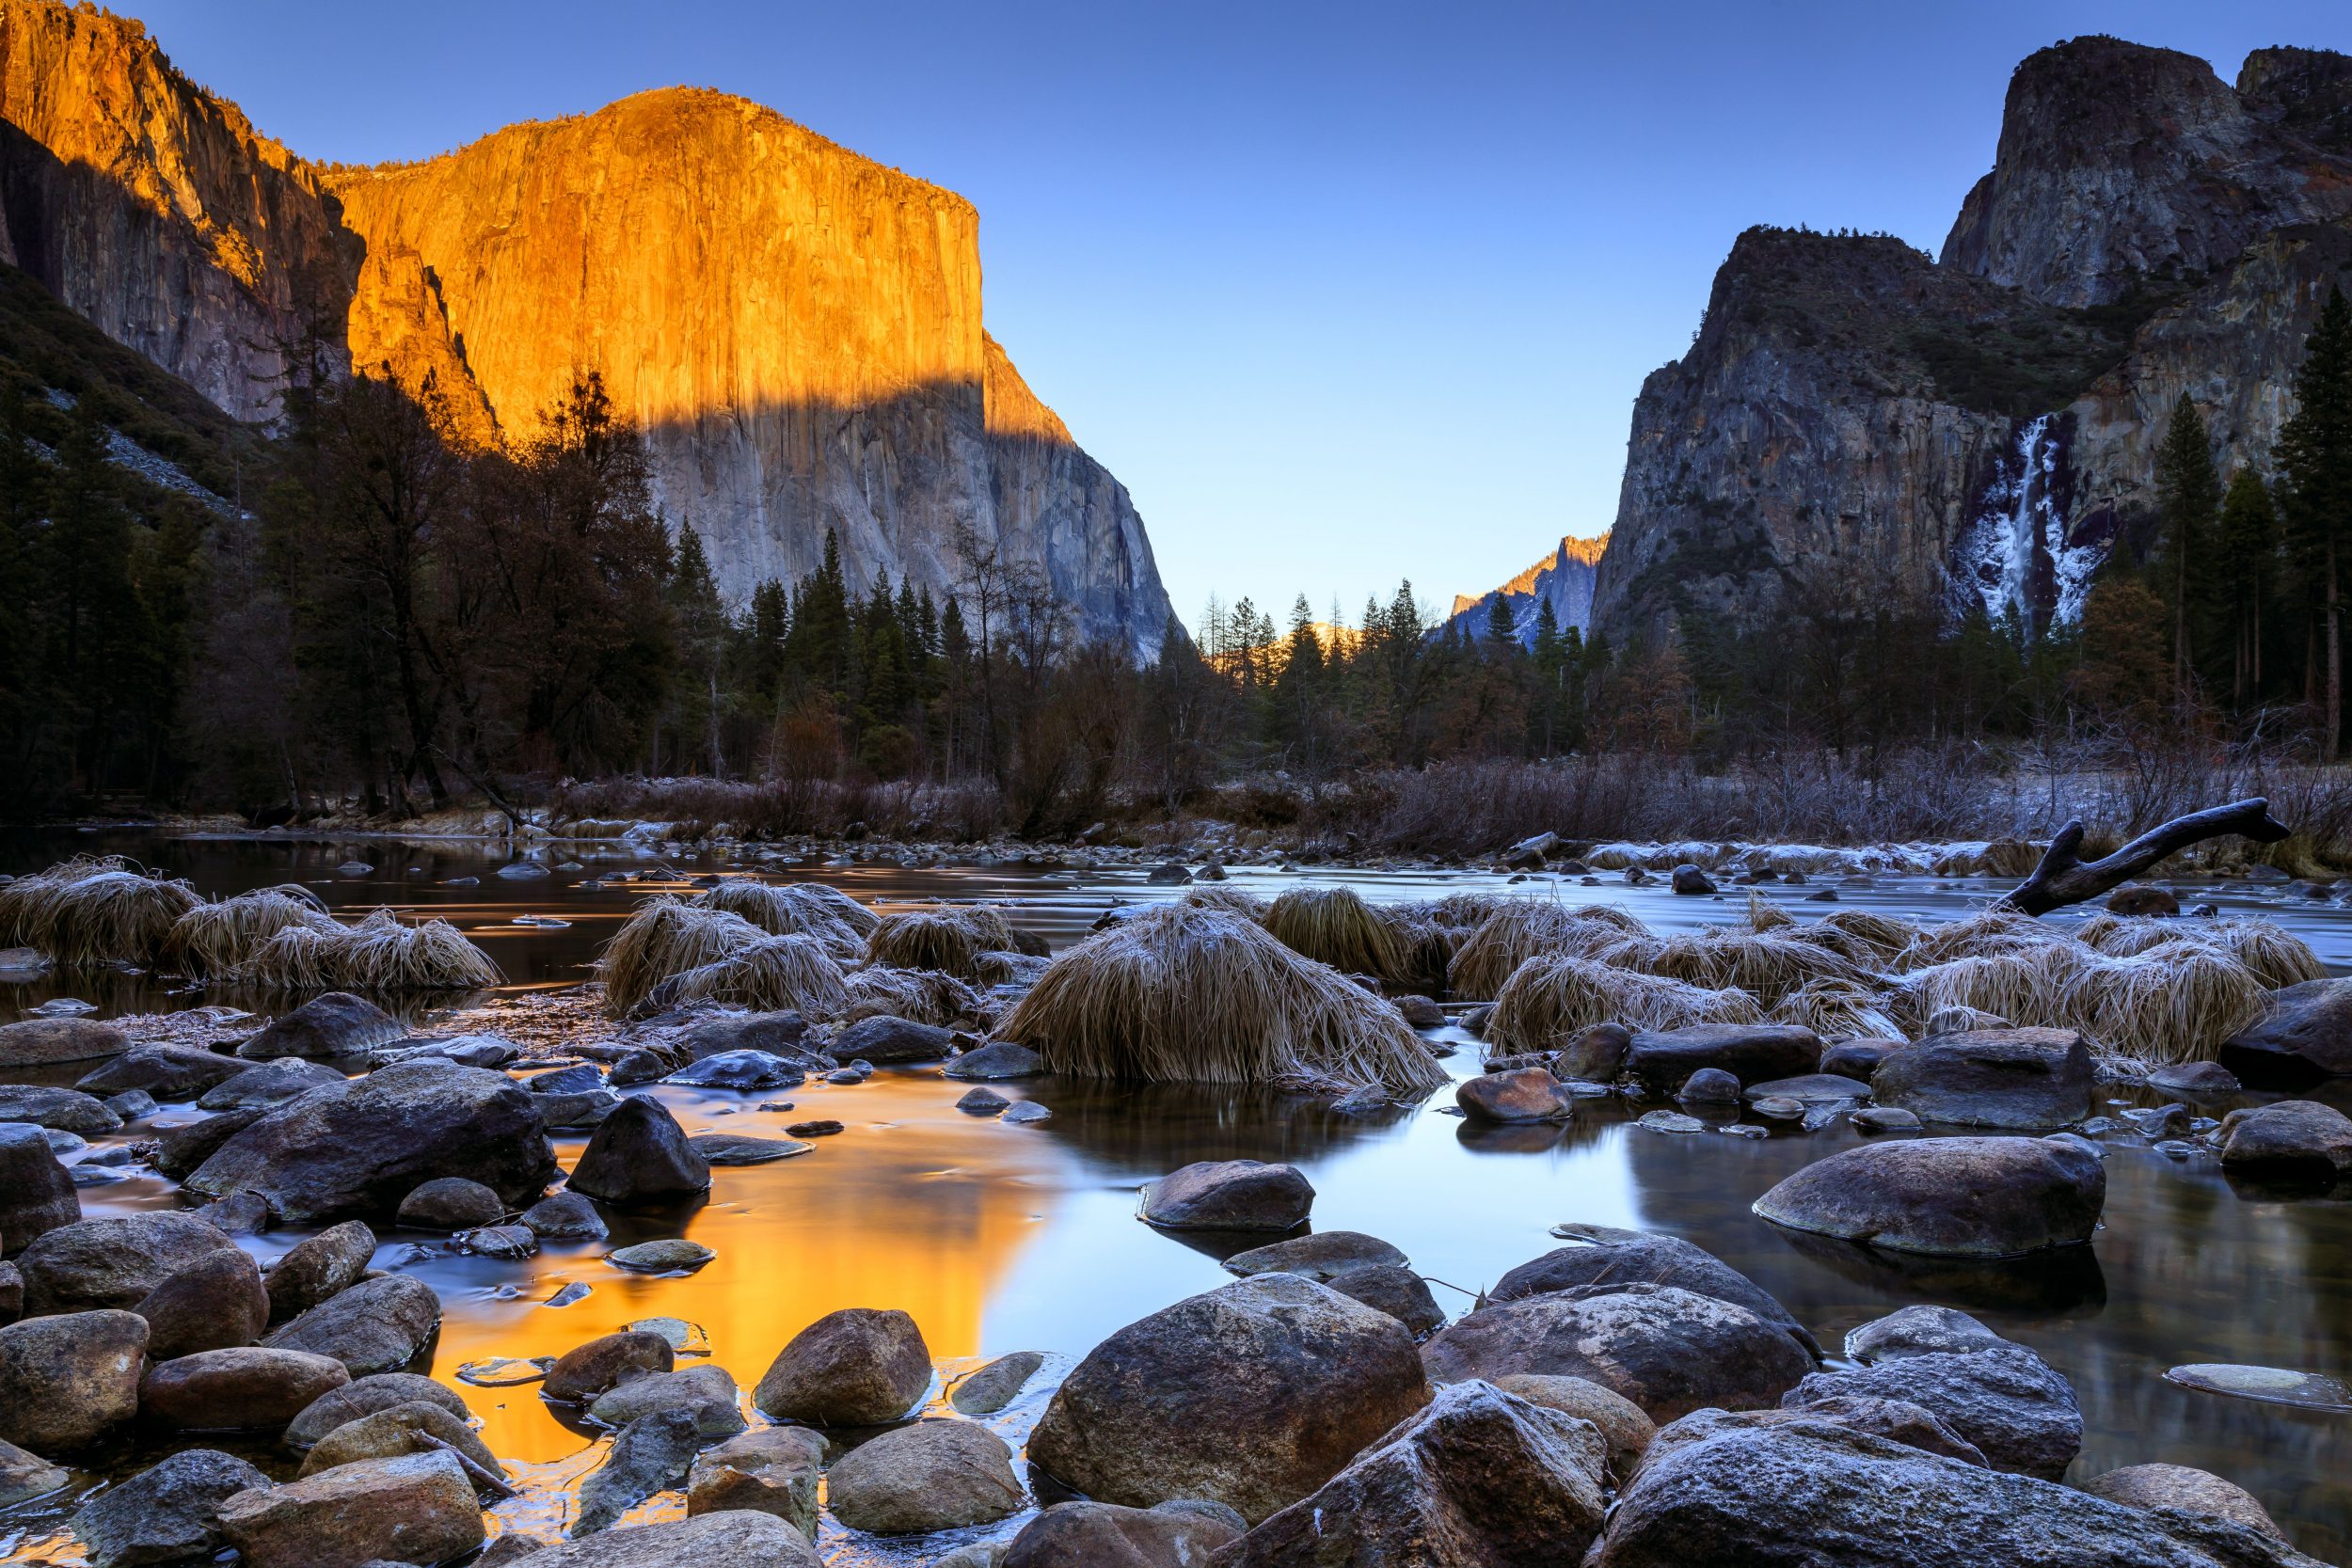 Possible norovirus outbreak linked to Yosemite National Park